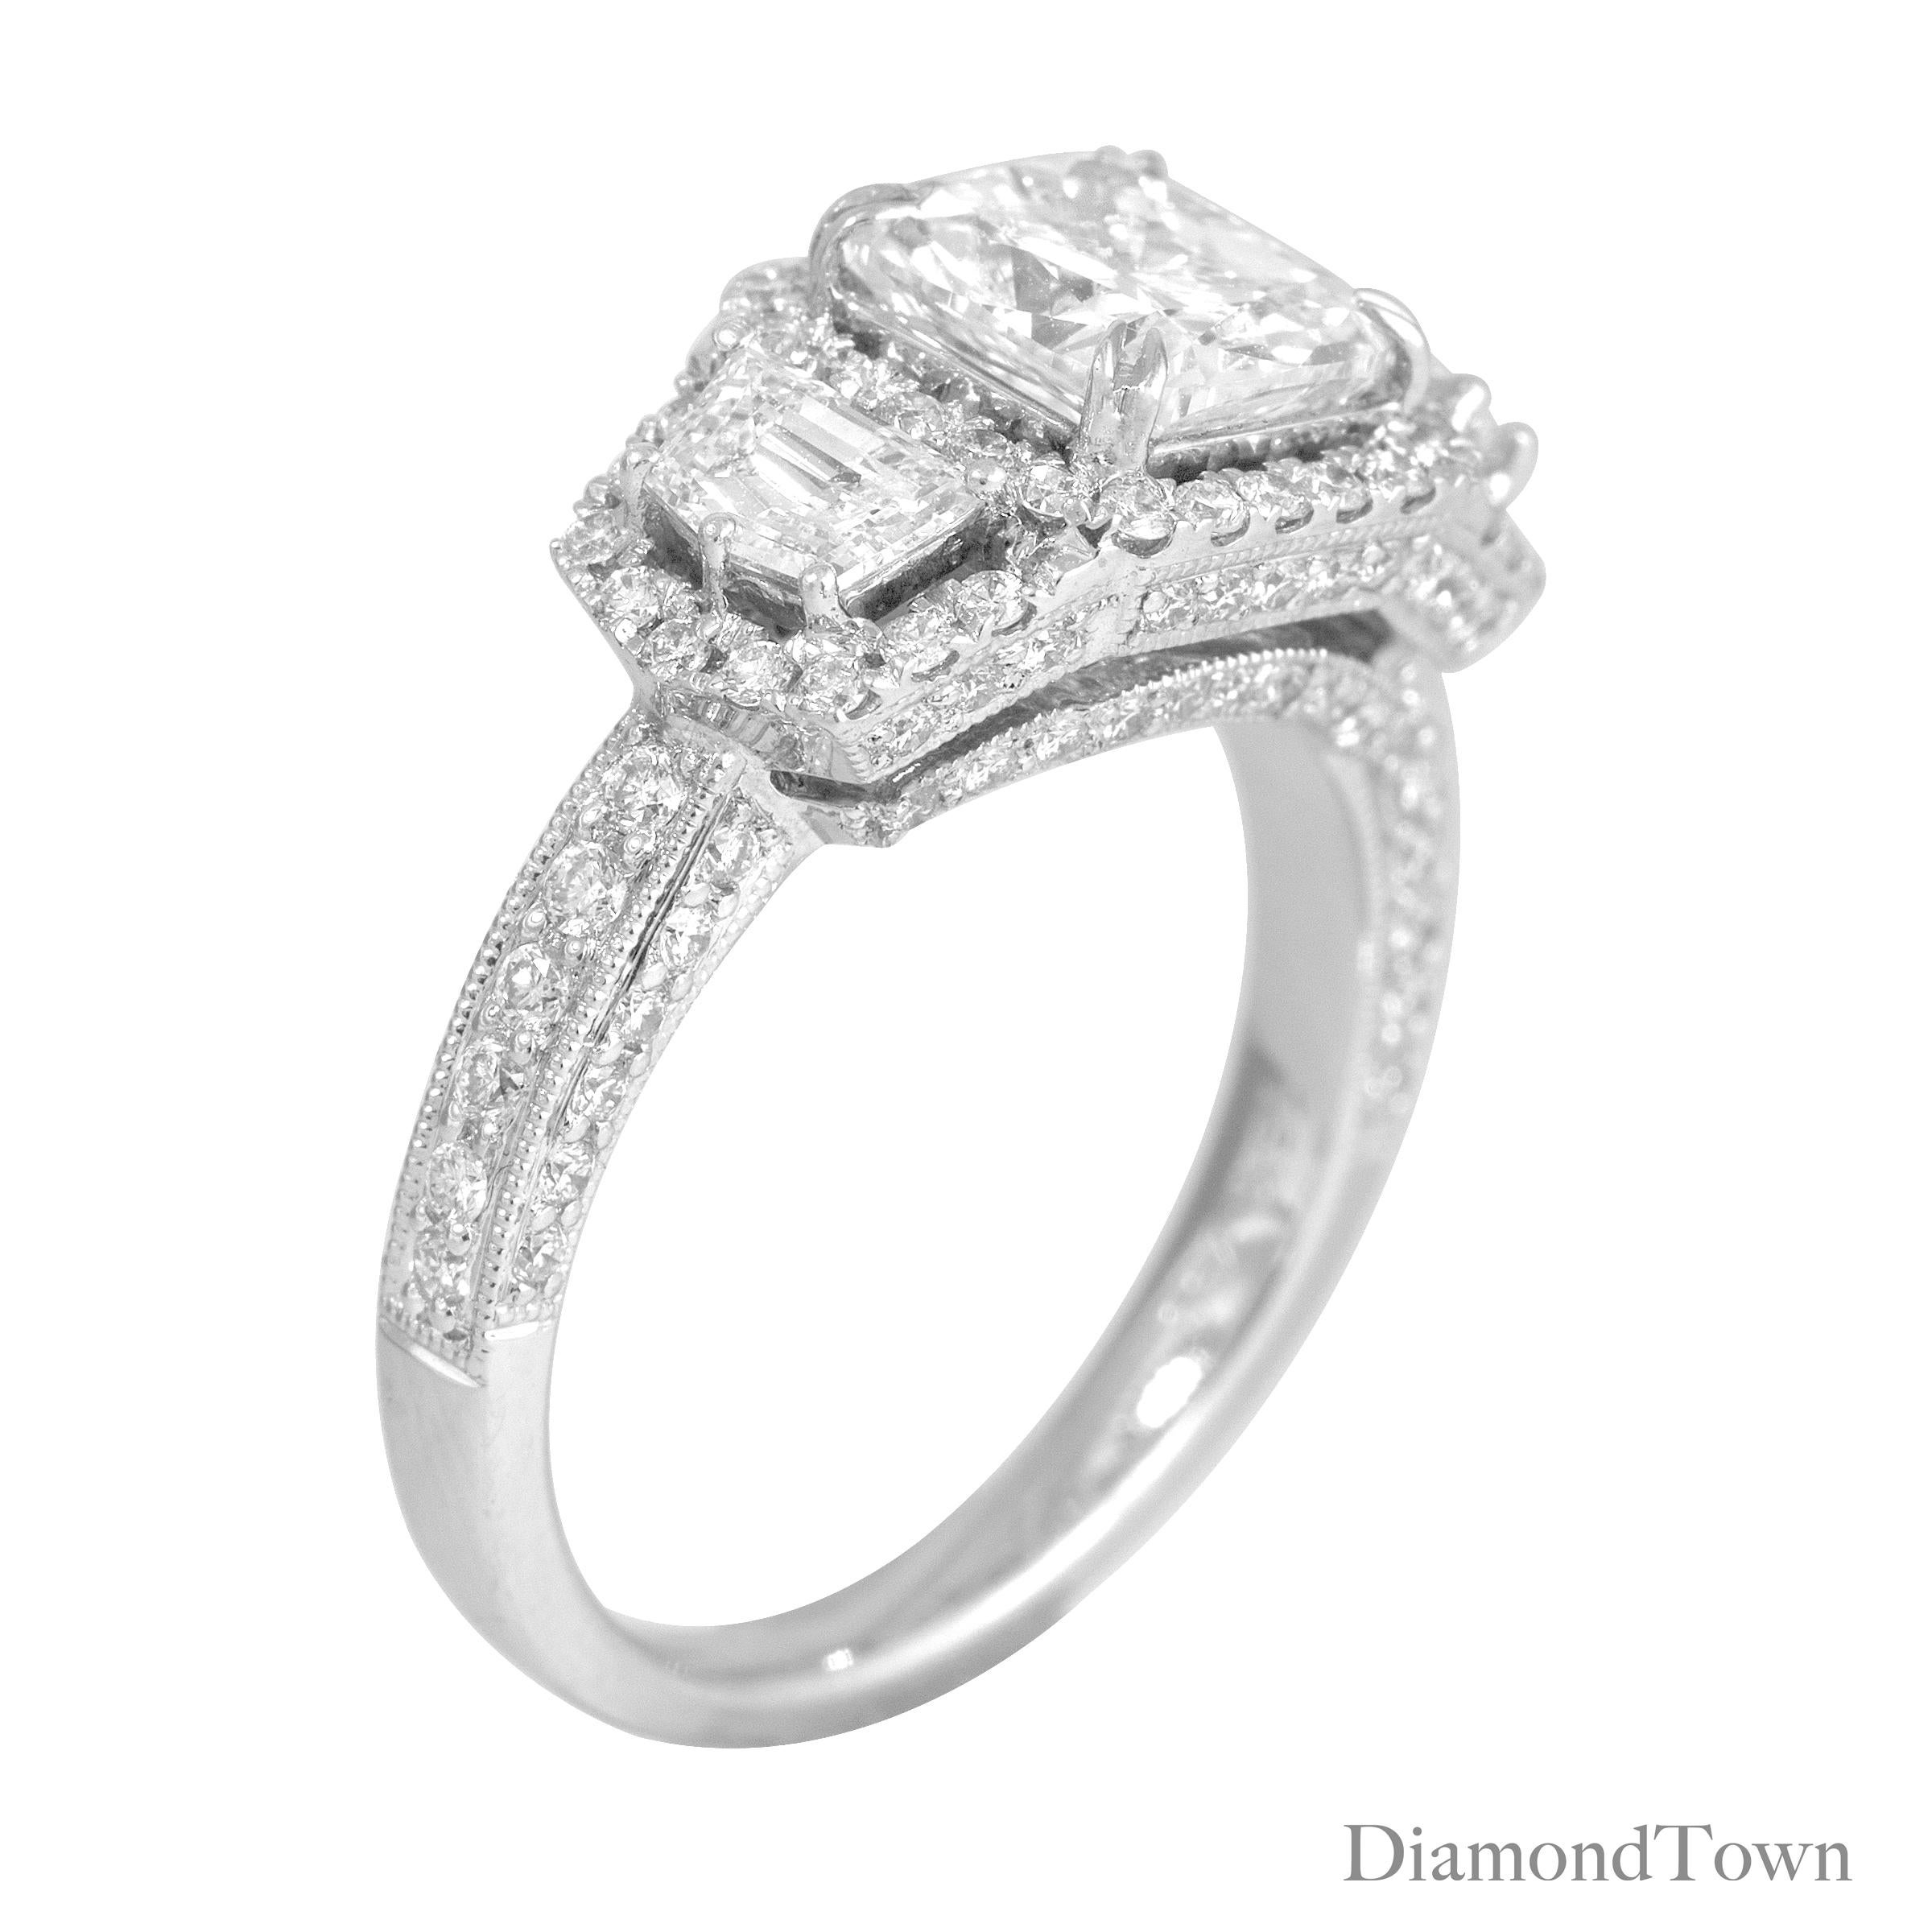 This exquisite, handcrafted ring boasts a 1.72 carat GIA certified cushion-cut center diamond, with two half-moon diamonds gracefully adorning its sides. Each of these three main stones is encircled by a halo of round white diamonds that extends